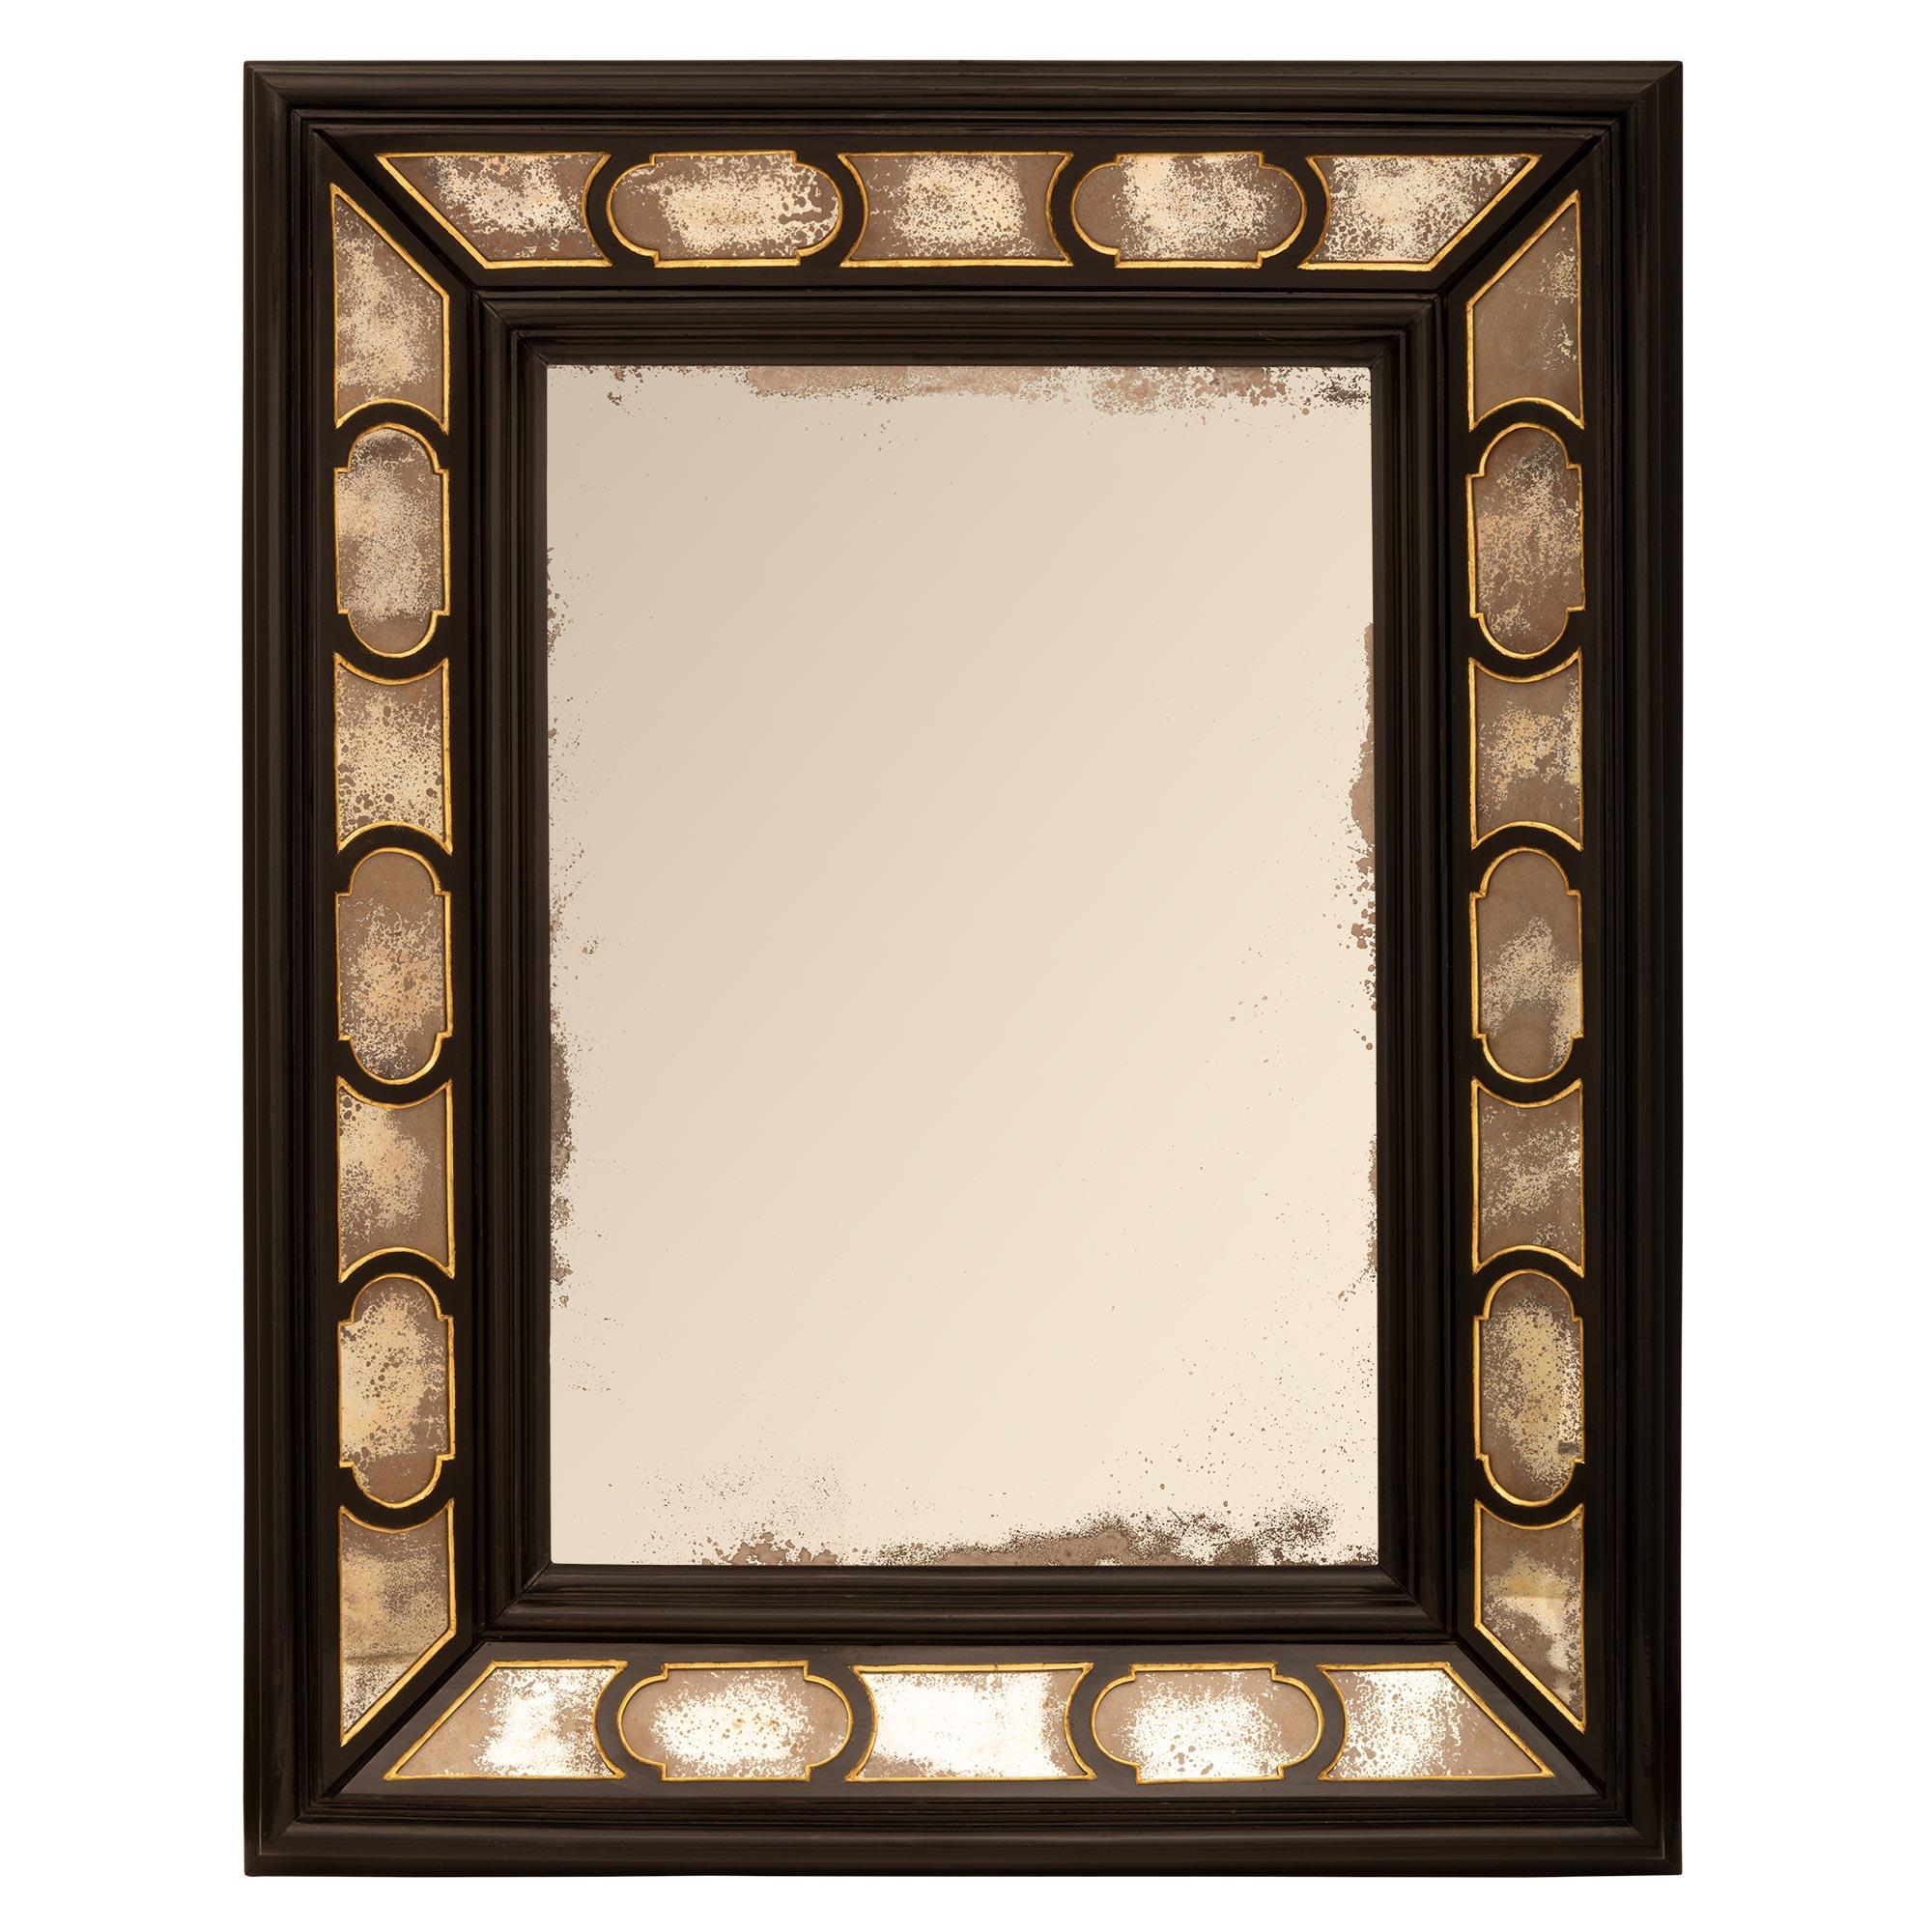 A striking and most decorative Italian 19th century ebonized fruitwood and giltwood double framed mirror. The mirror retains all of its original mirror plates throughout with the central plate framed within a fine wrap around mottled border. All of